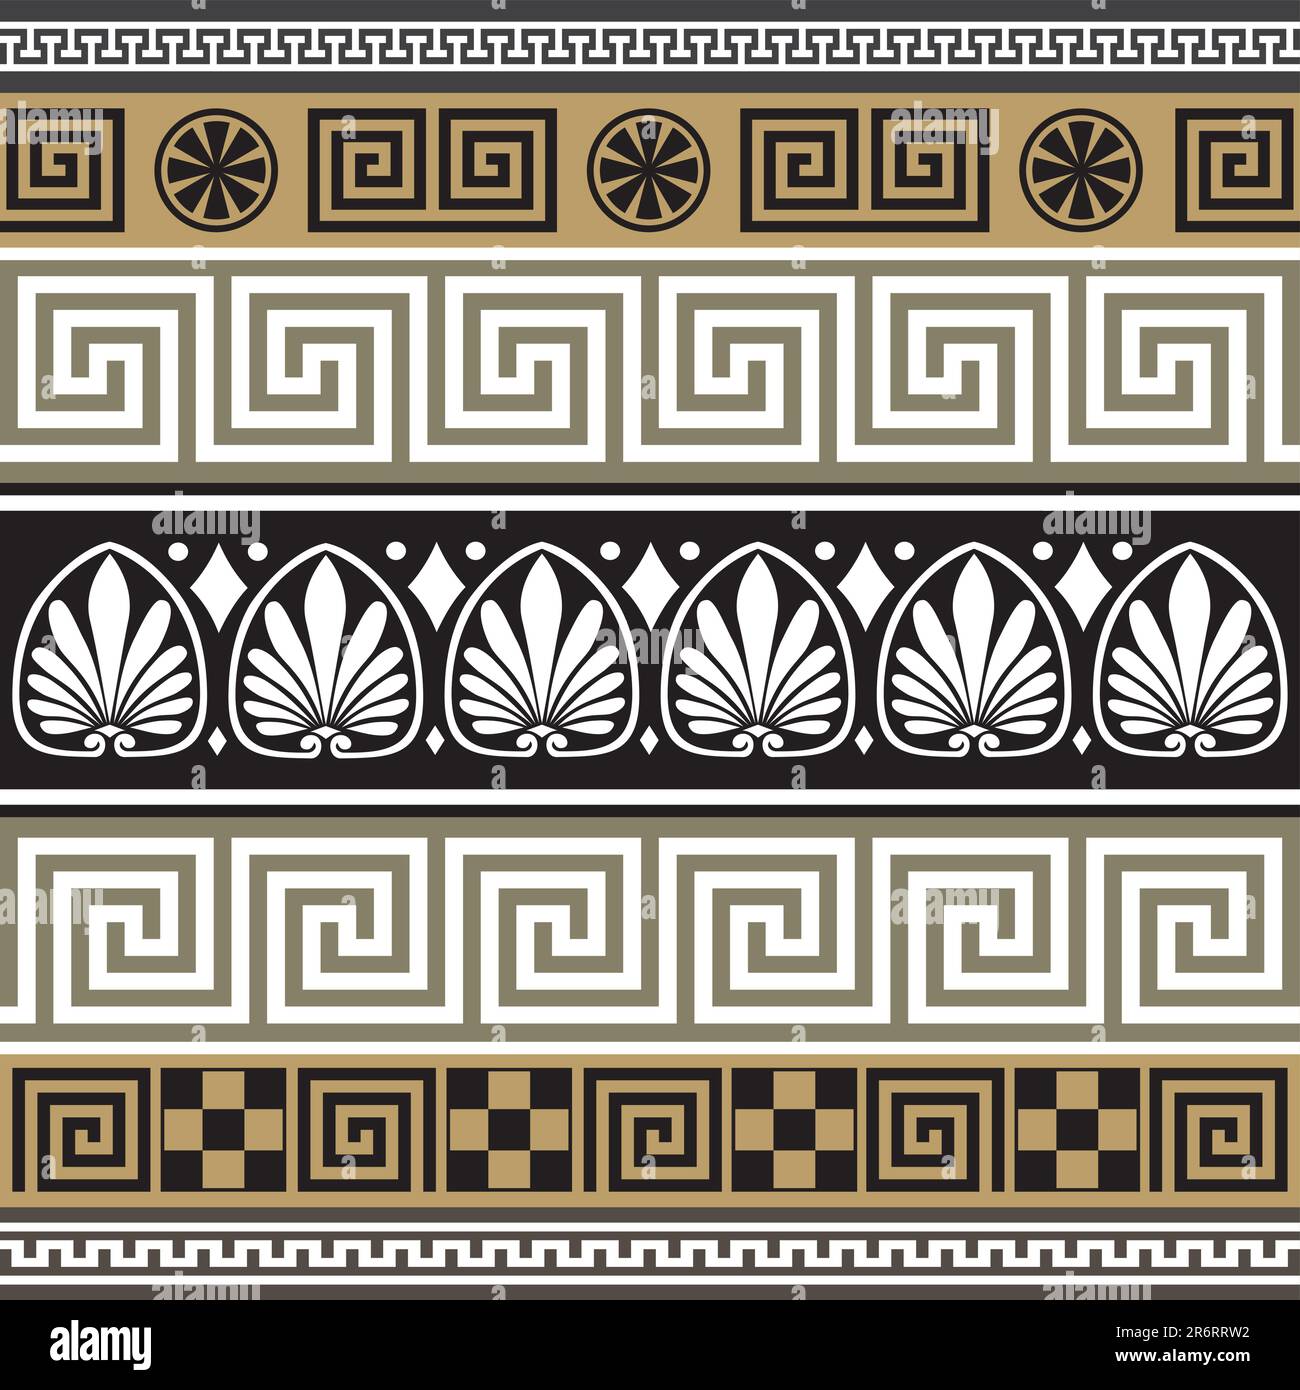 Set of greek borders, full scalable vector graphic included Eps v8 and 300 dpi JPG. Stock Vector